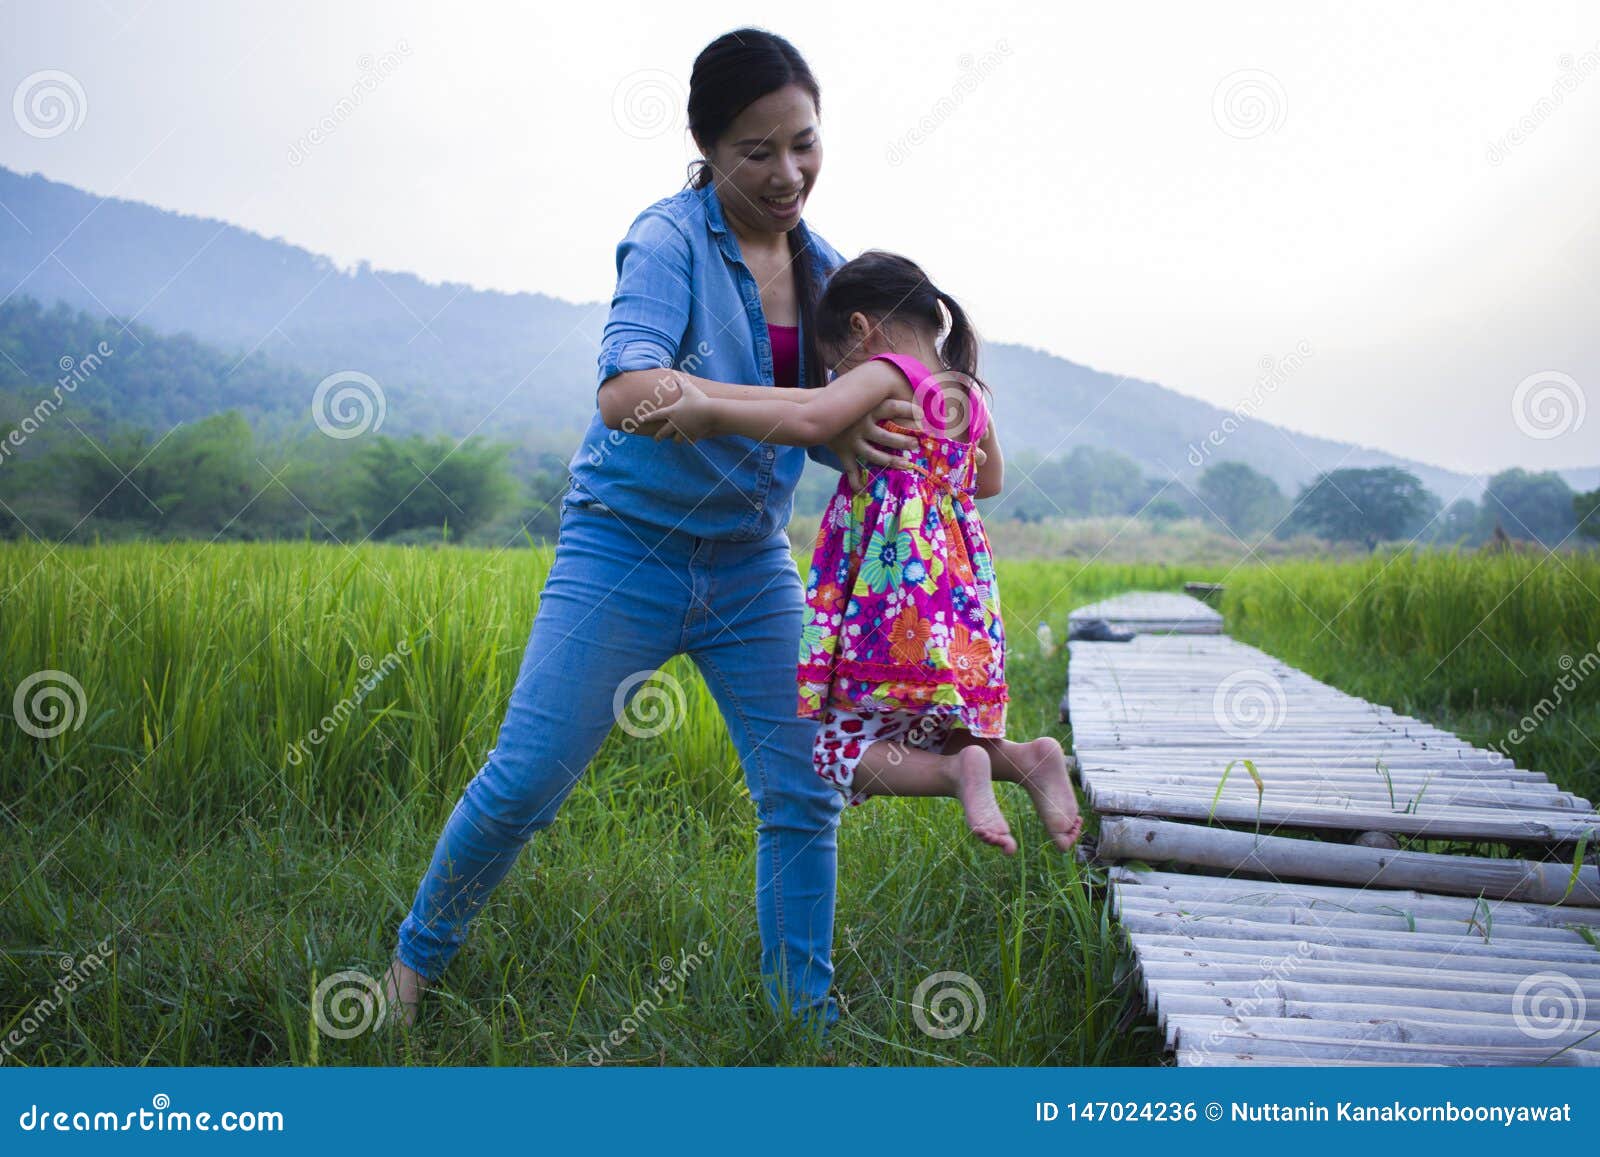 Mother Help Her Child To Cross Stream, Mother Lifting Daughter in R image photo